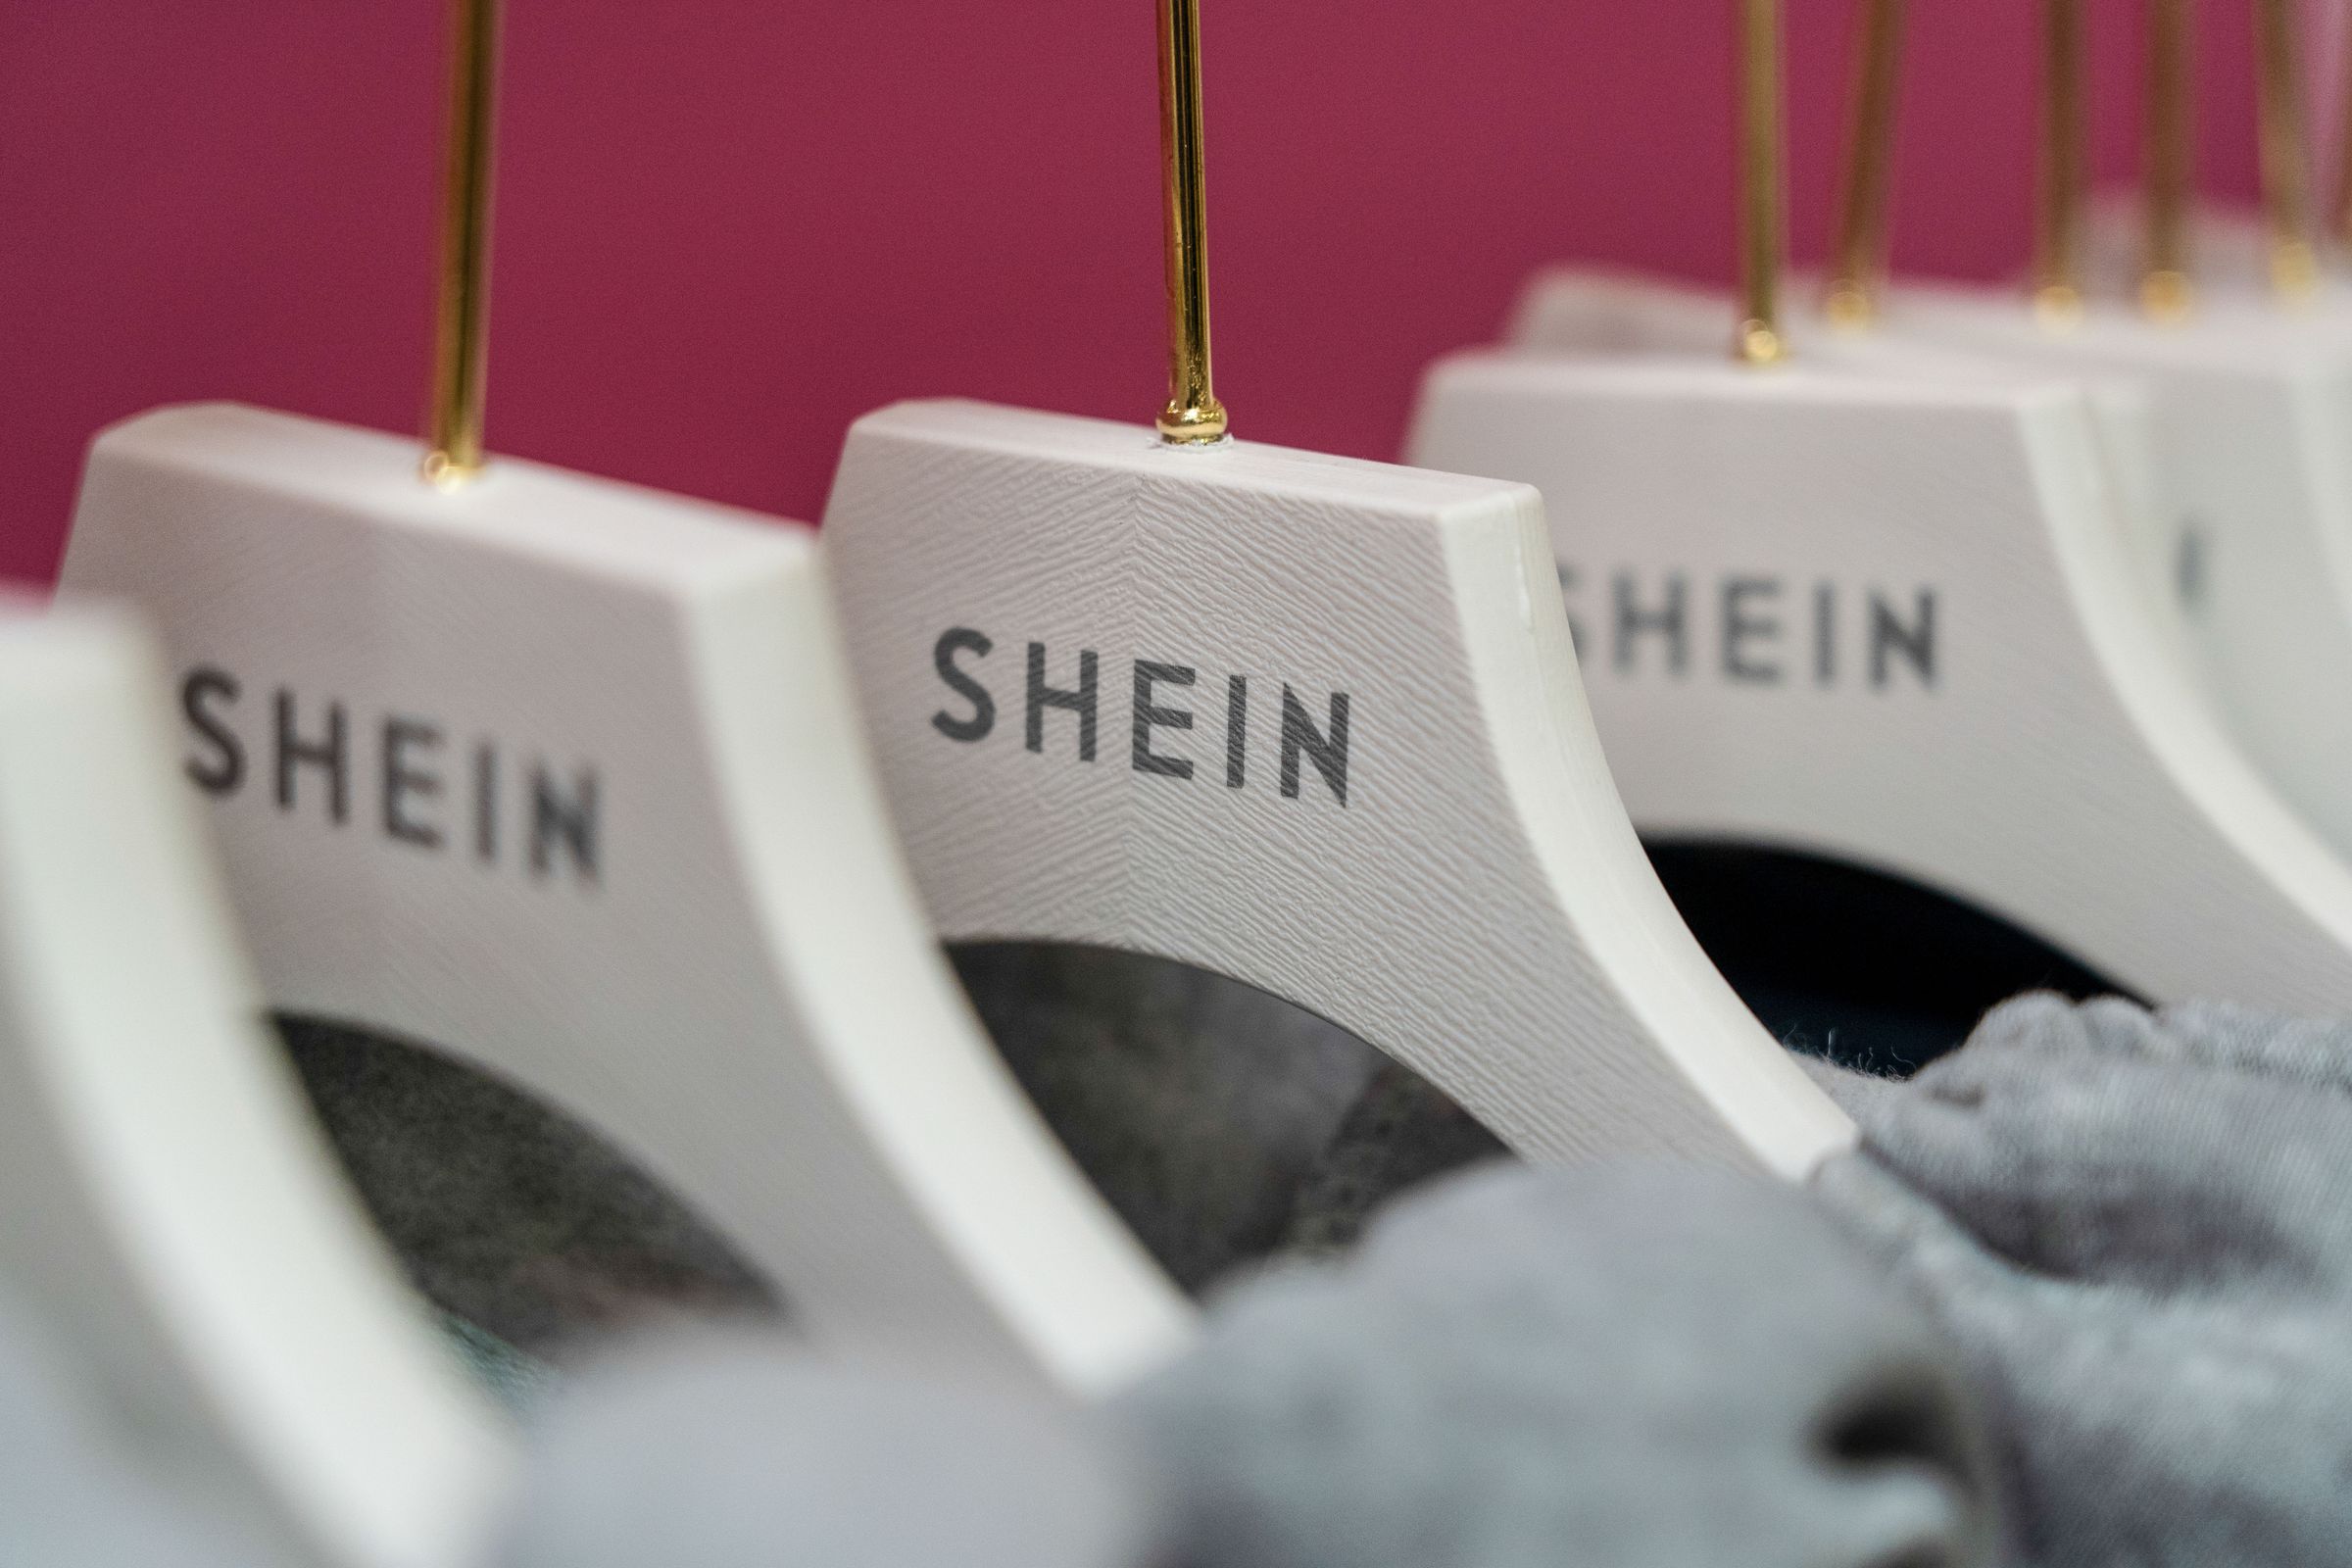 A rack of clothing with Shein-branded hangers